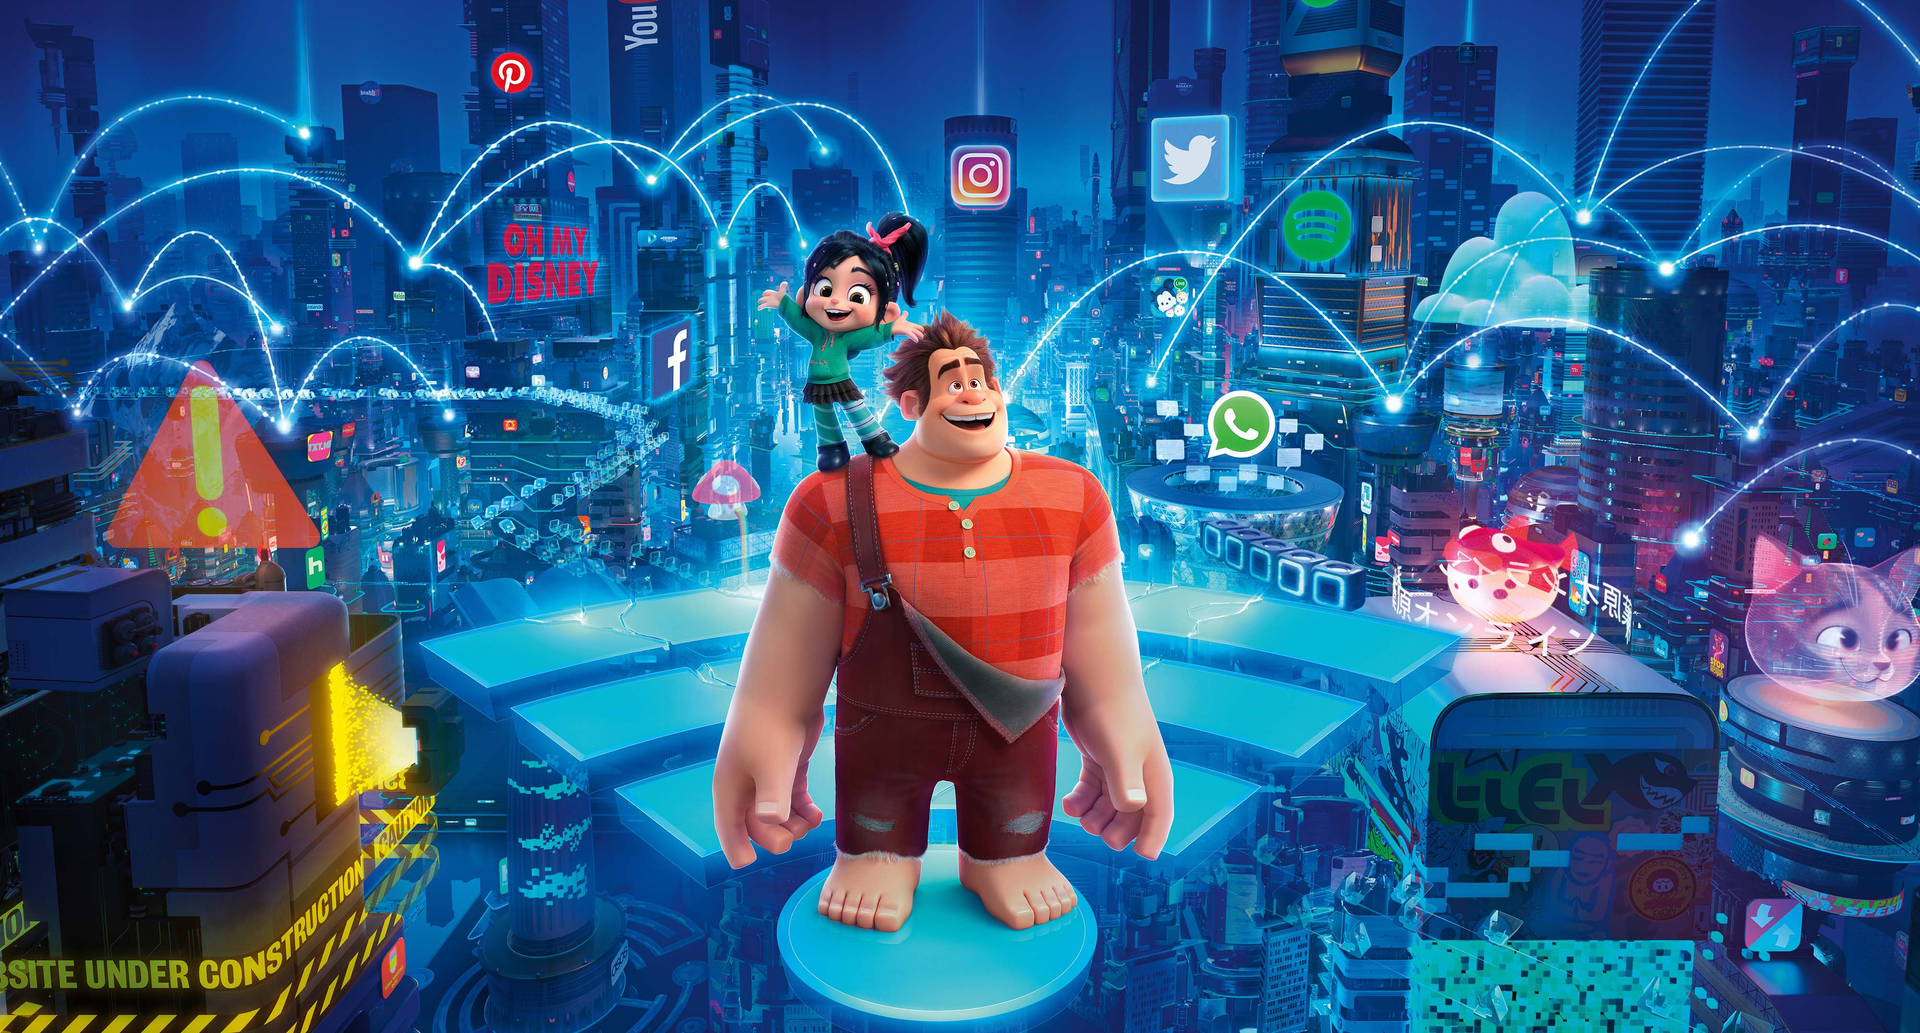 Wreck-it Ralph At Internet View Background